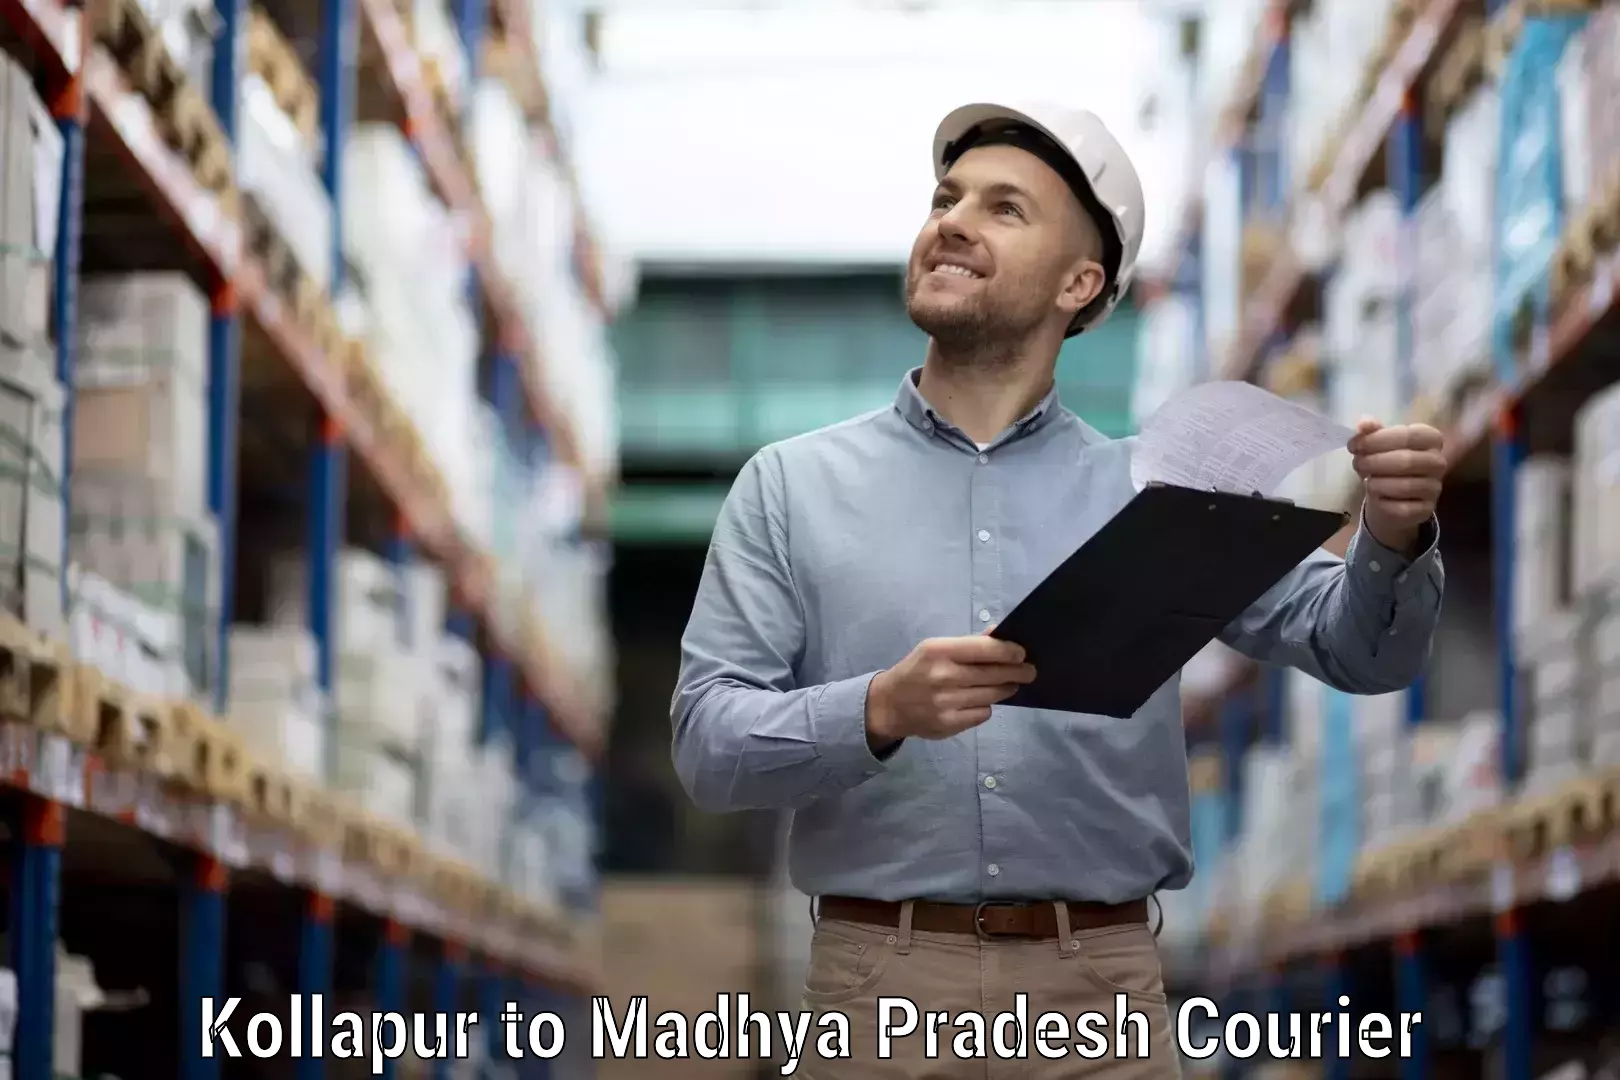 Easy access courier services Kollapur to Nalkheda